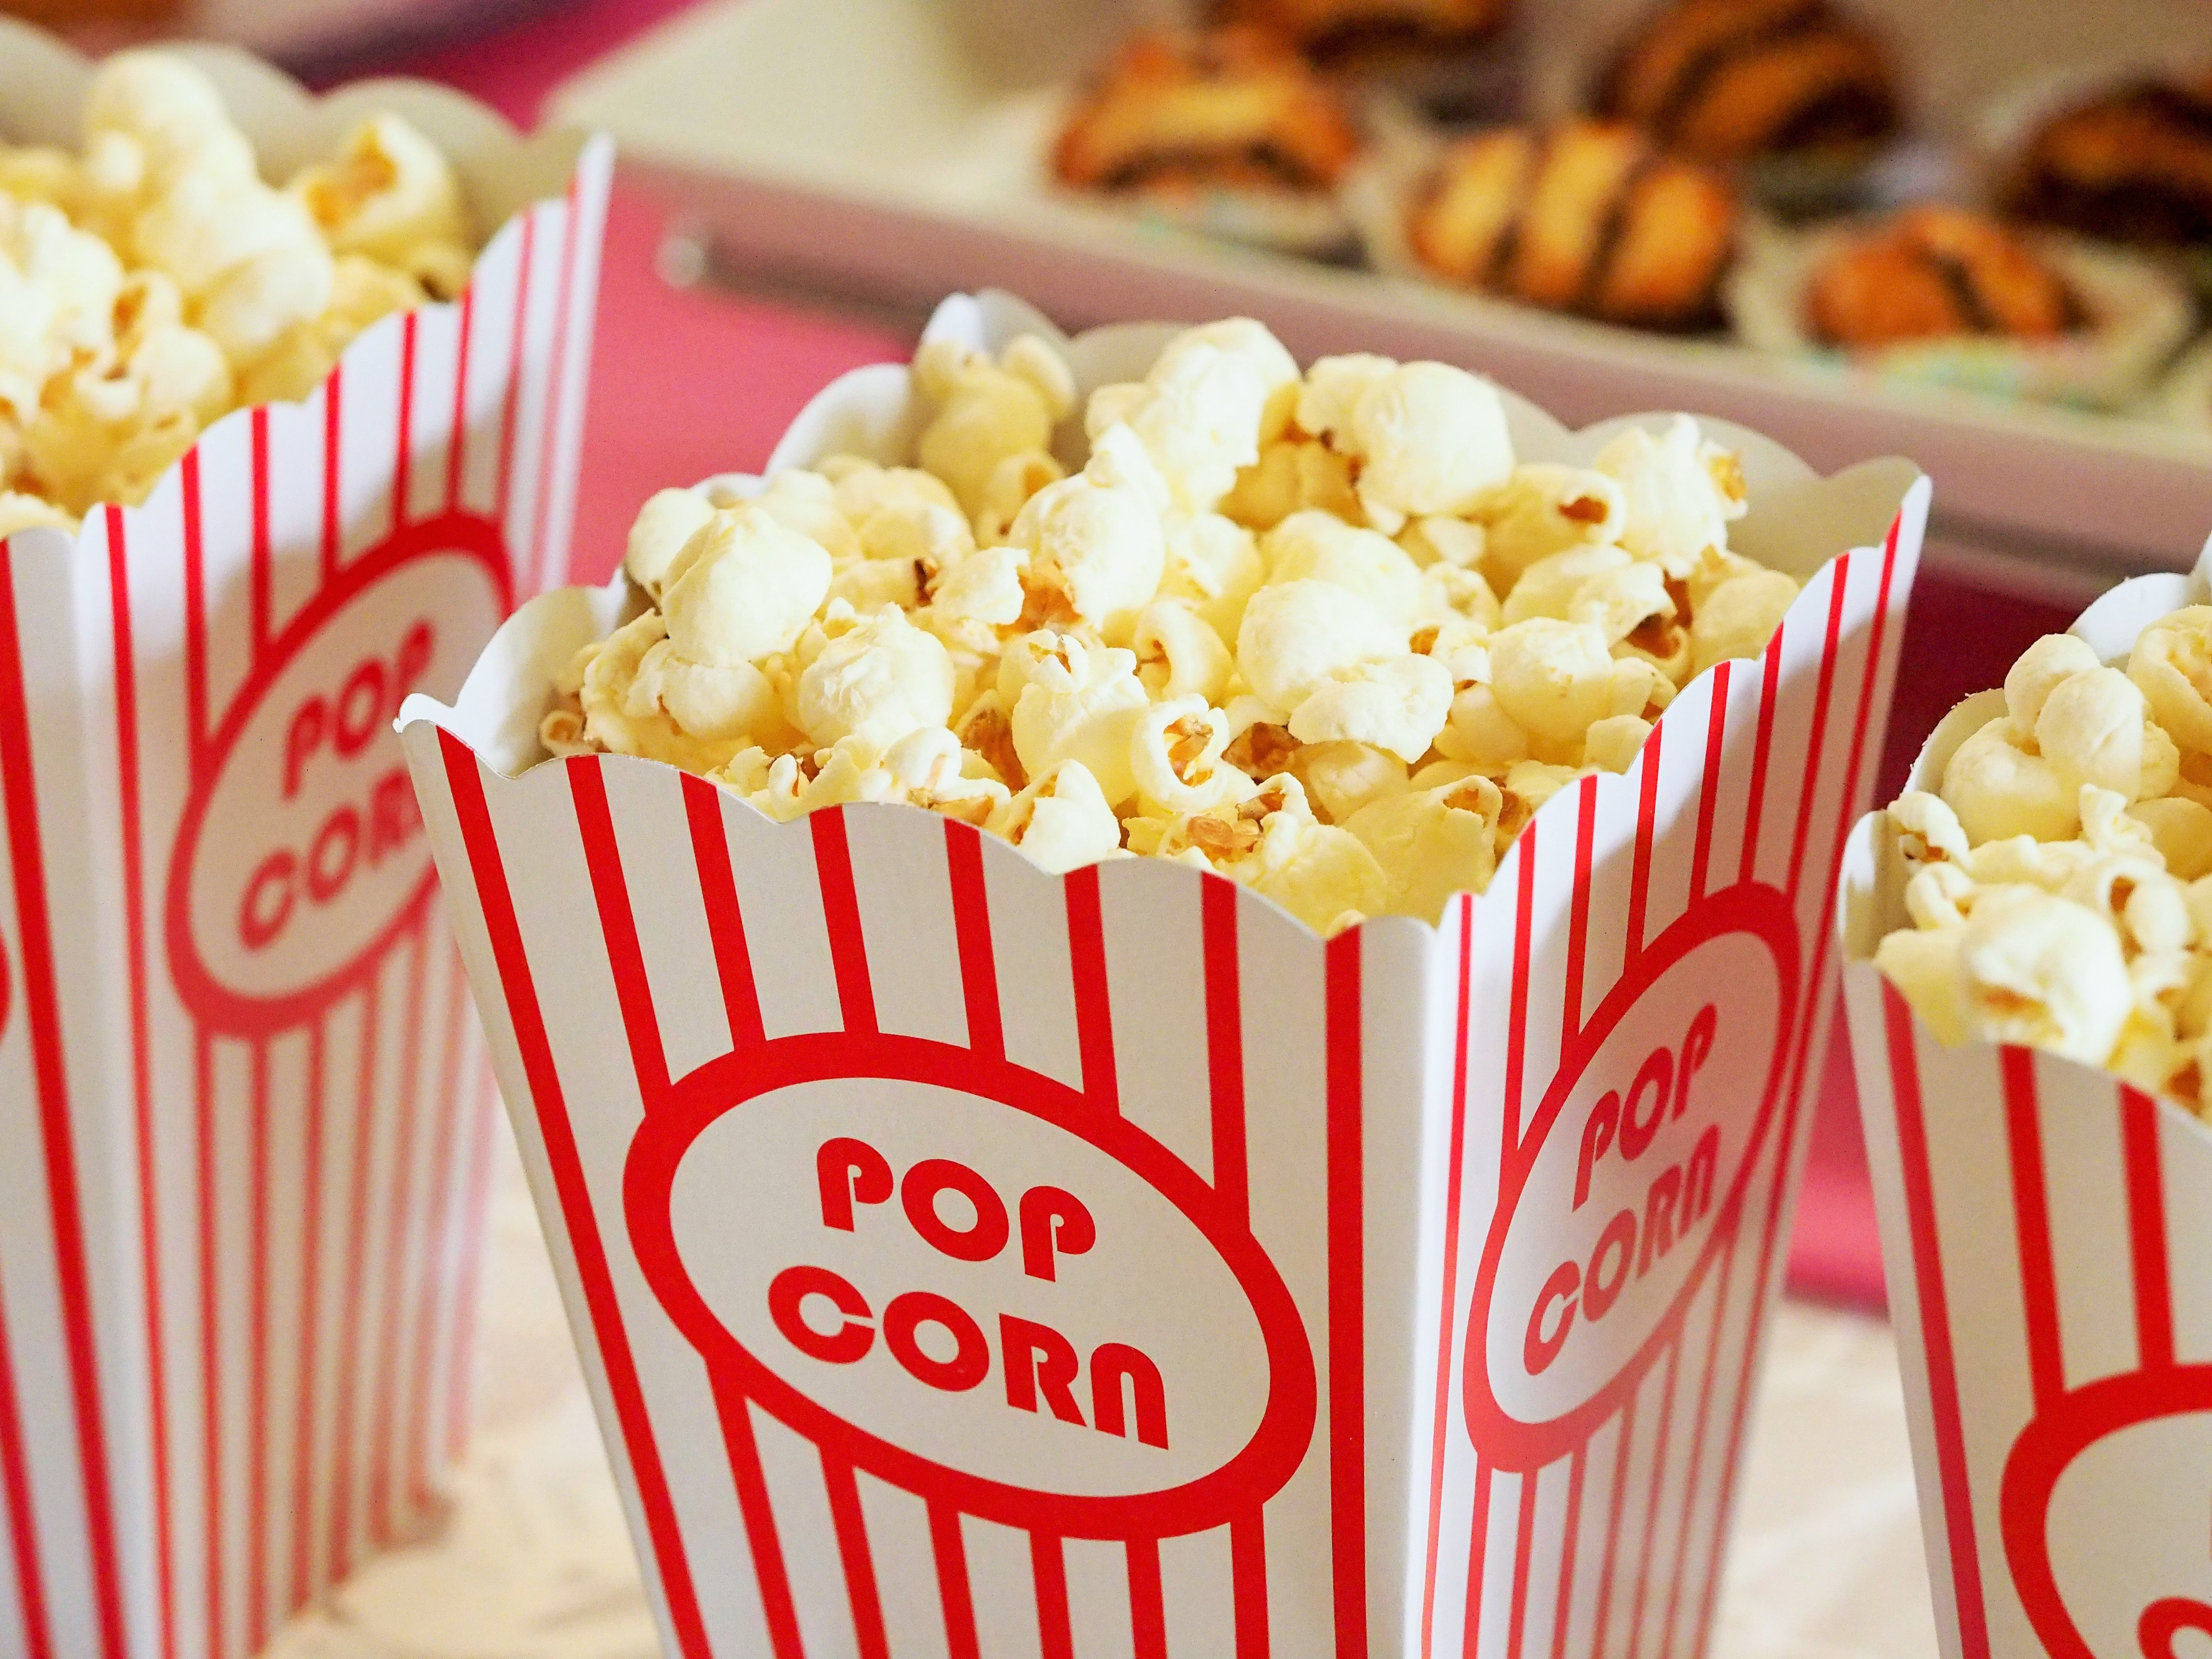 discounted kids summer movie offers – popcorn close up